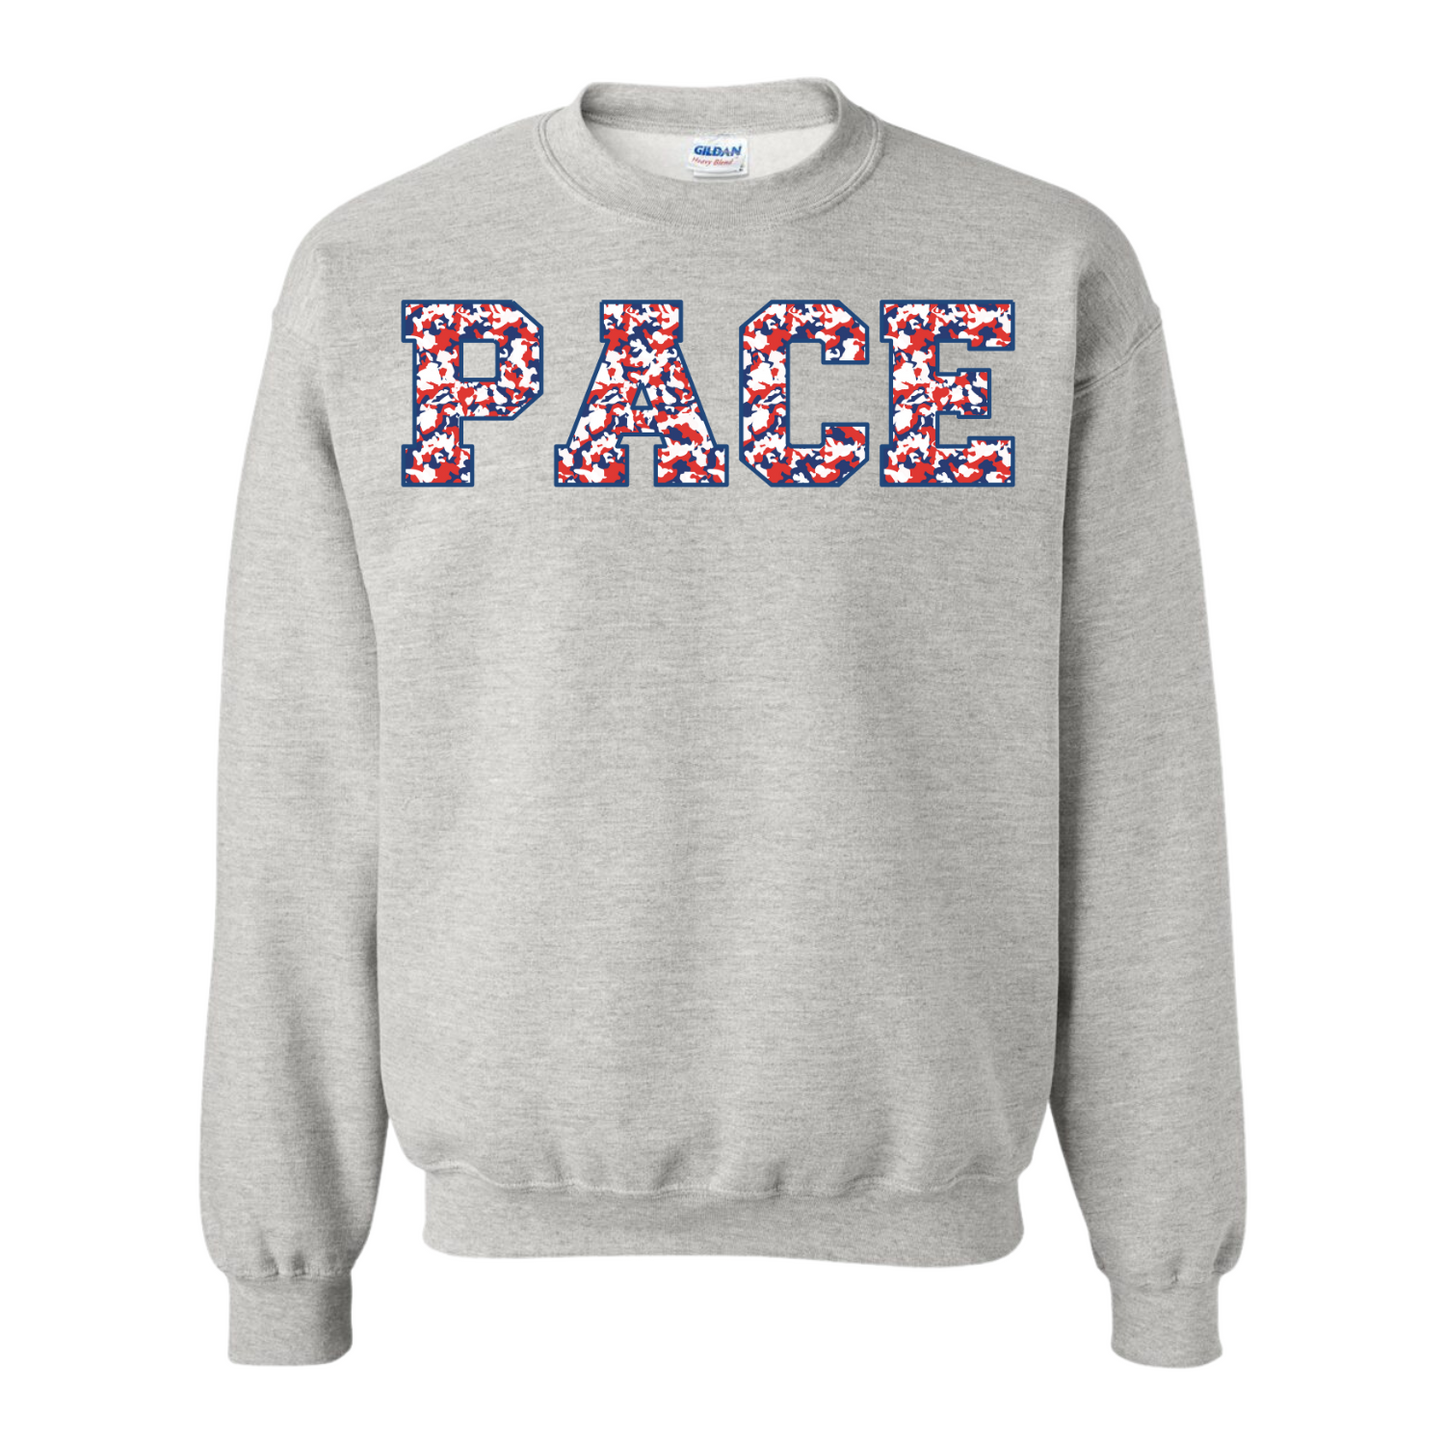 Pace Red + White + Blue Camo Sweatshirt Youth